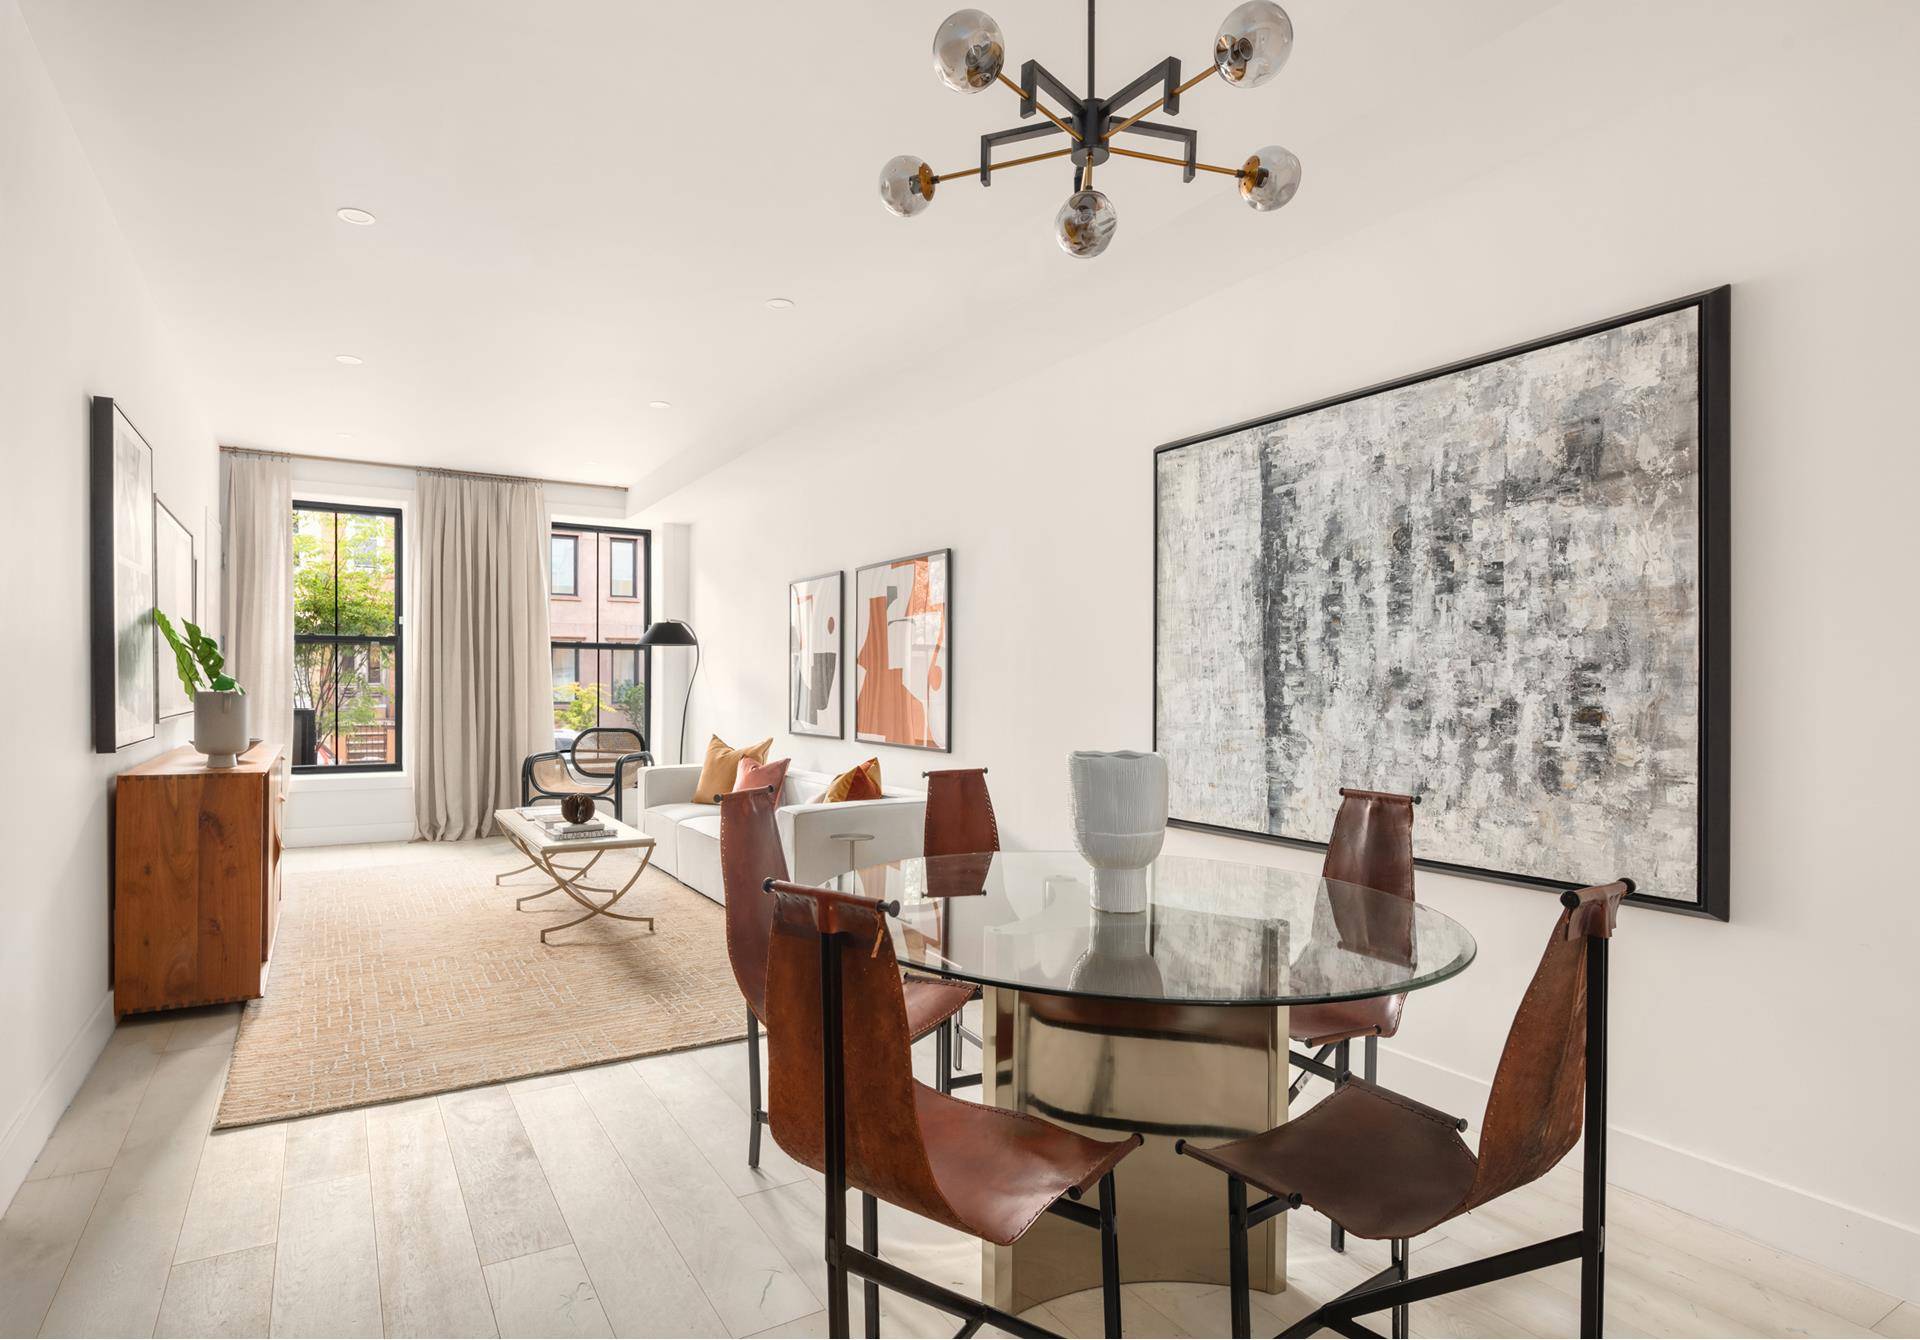 Located at 371 Douglass Street, between 4th and 5th Avenues, Residence 1is a stunning approximately 2000 sq ft duplex is nestled in the heart of Park Slope, one of New ...